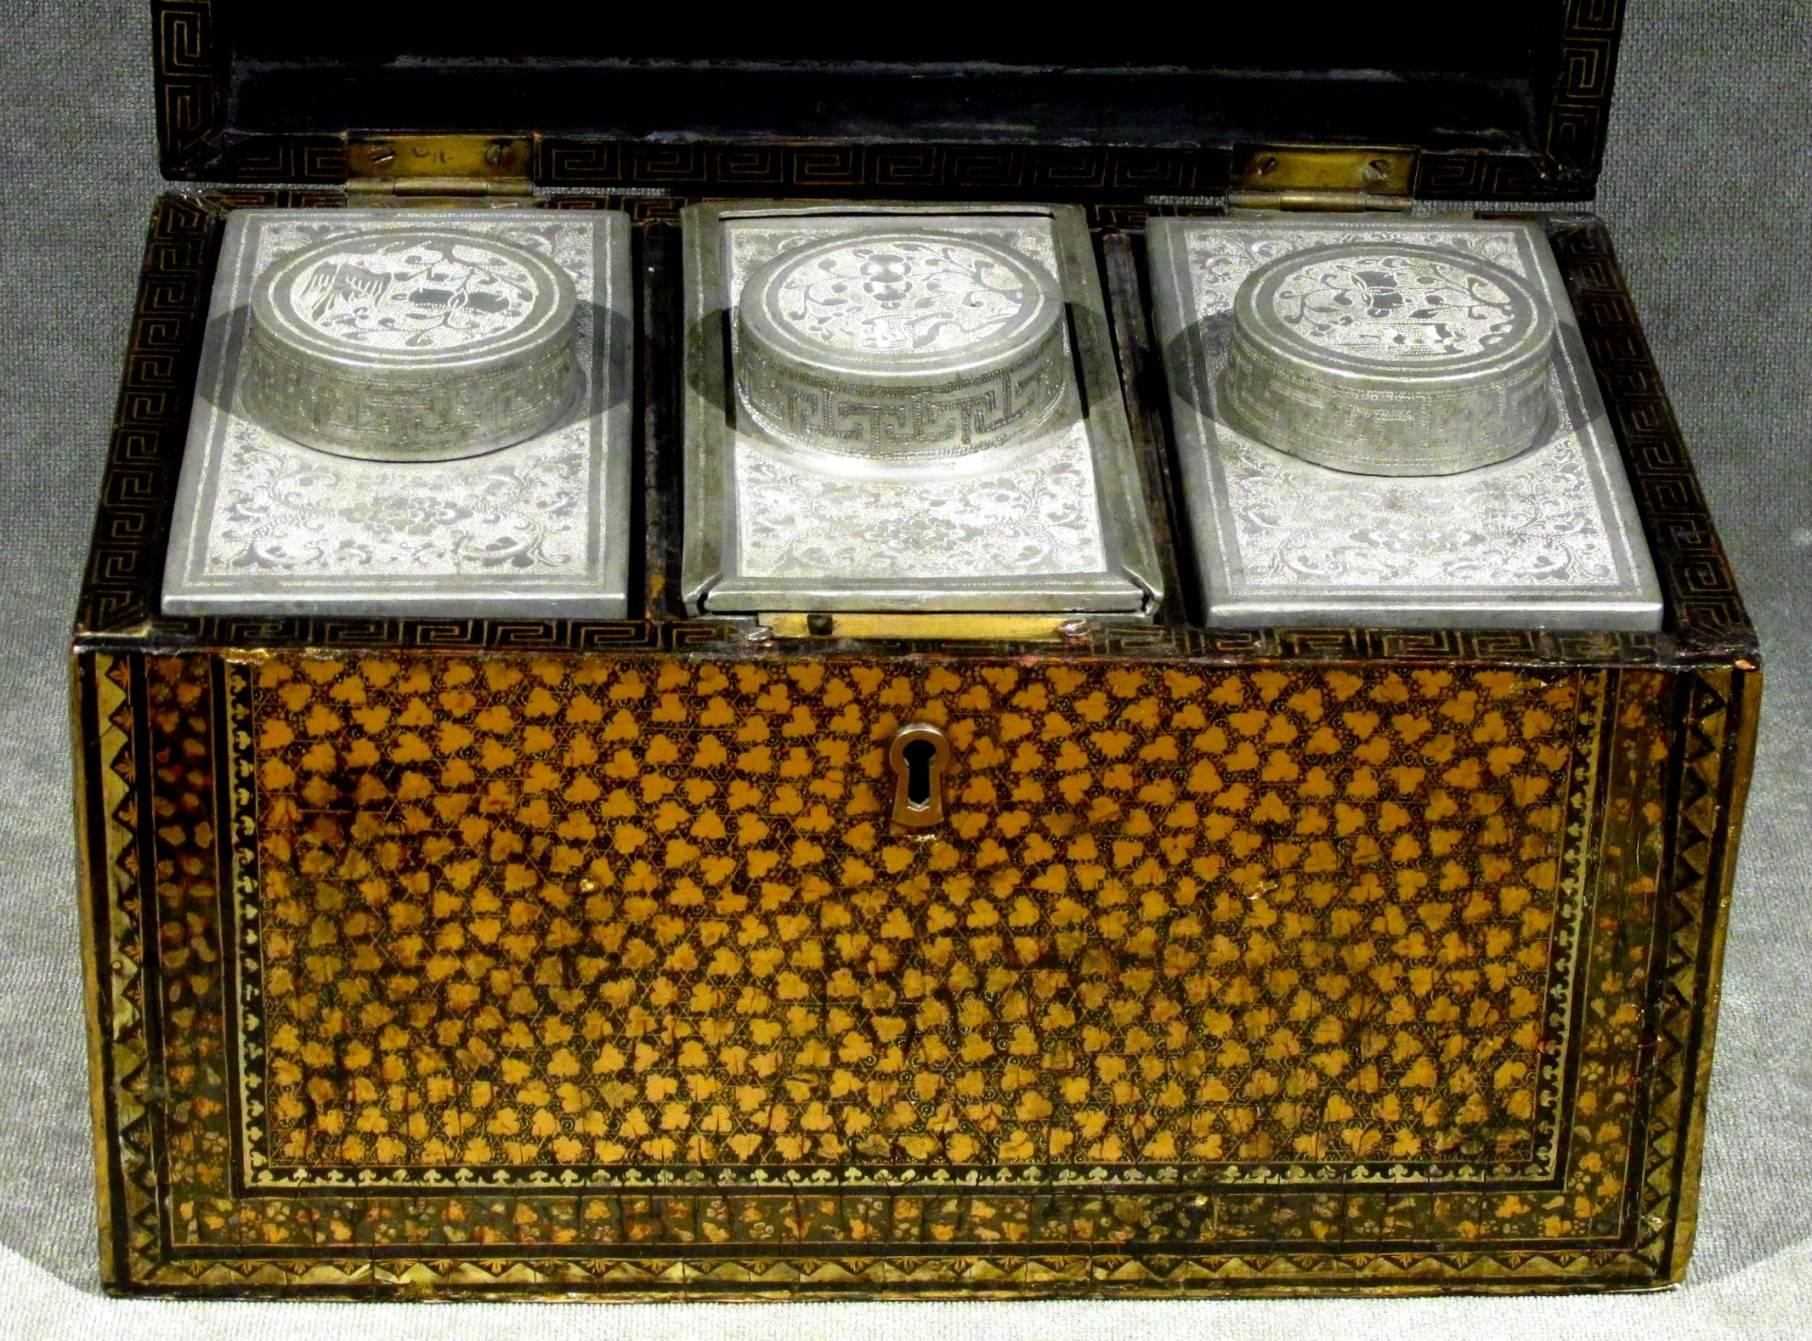 Wood An Exceptional 19th Century Chinese Export Lacquer Tea Caddy, Guangzhou (Canton)